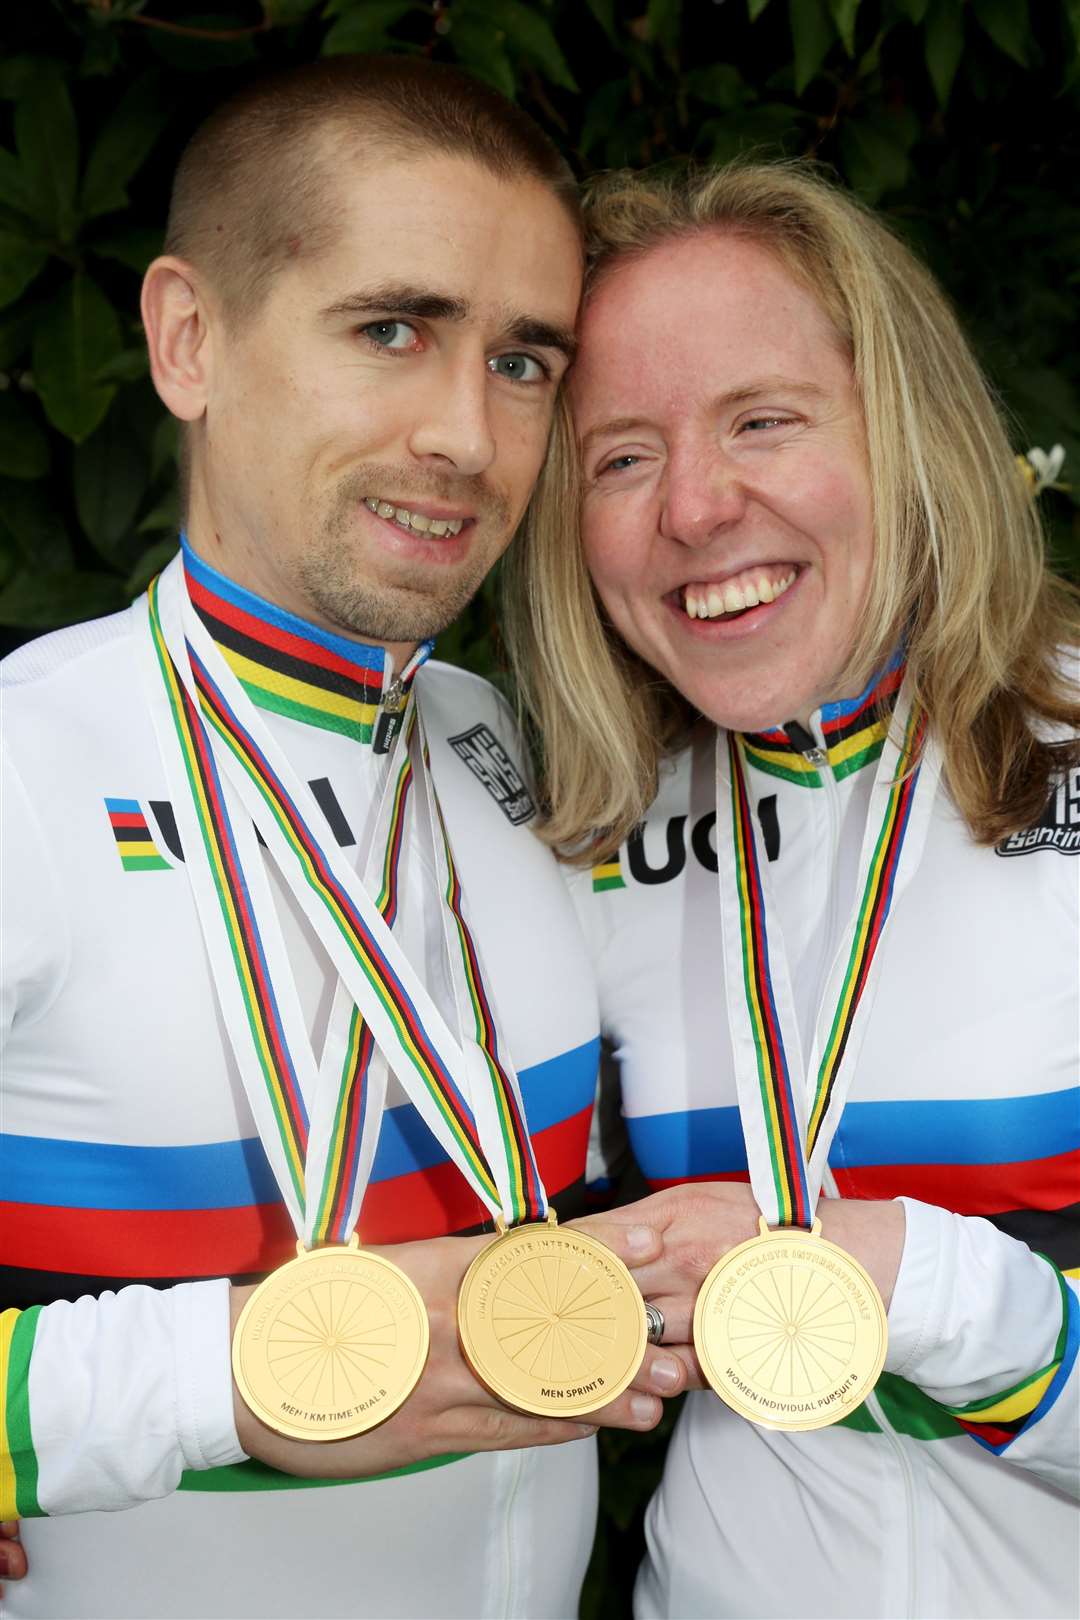 Neil and Lora Fachie will be headlining an event in Inverurie as part of wider cycling activities